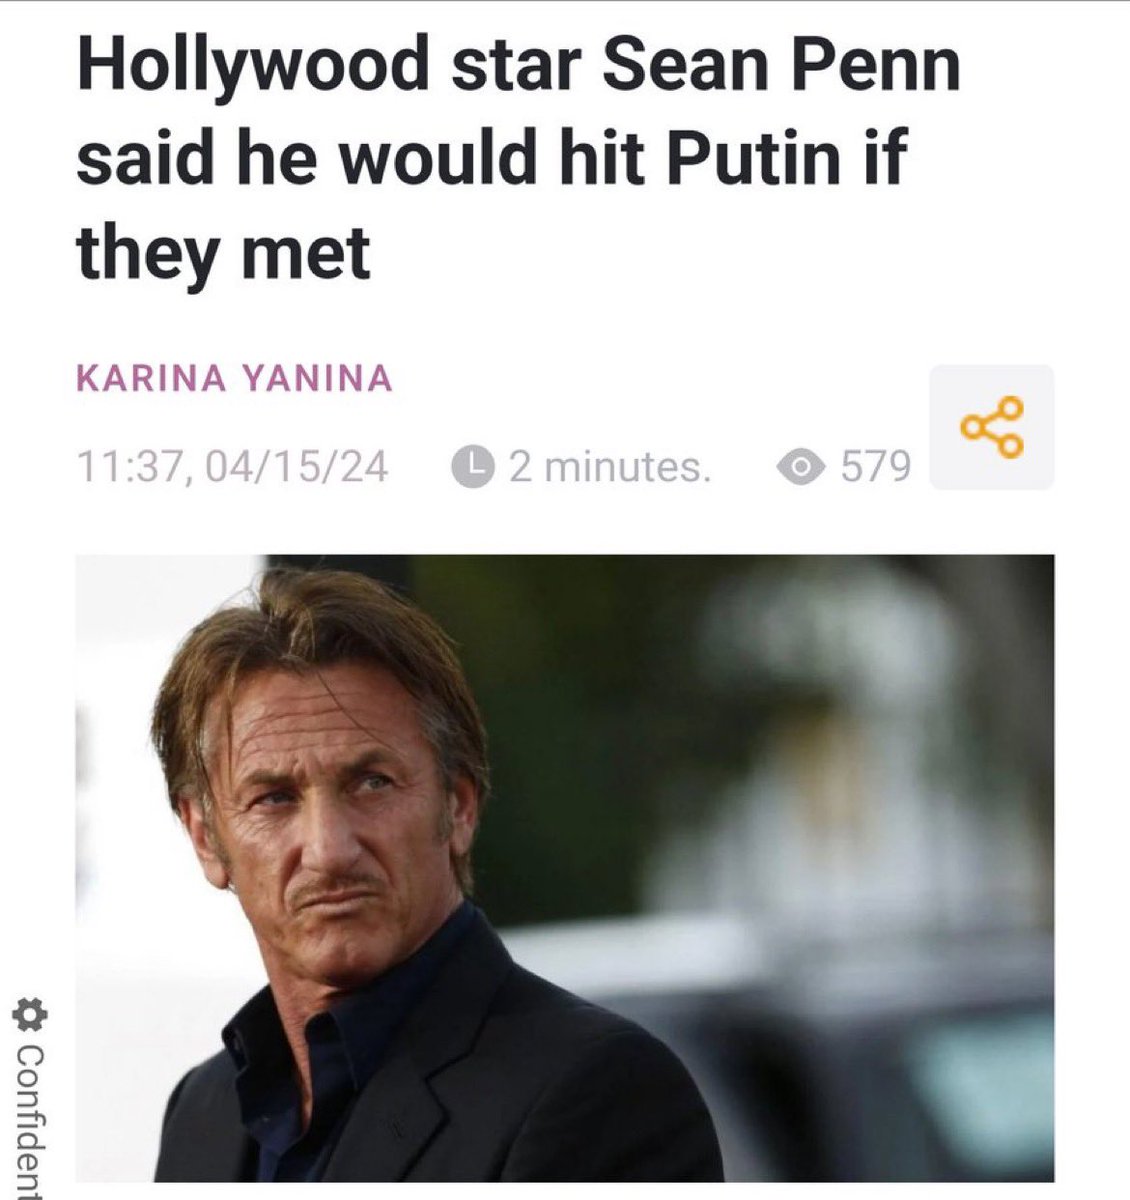 Sean Penn is a washed up actor trying to keep his relevance.